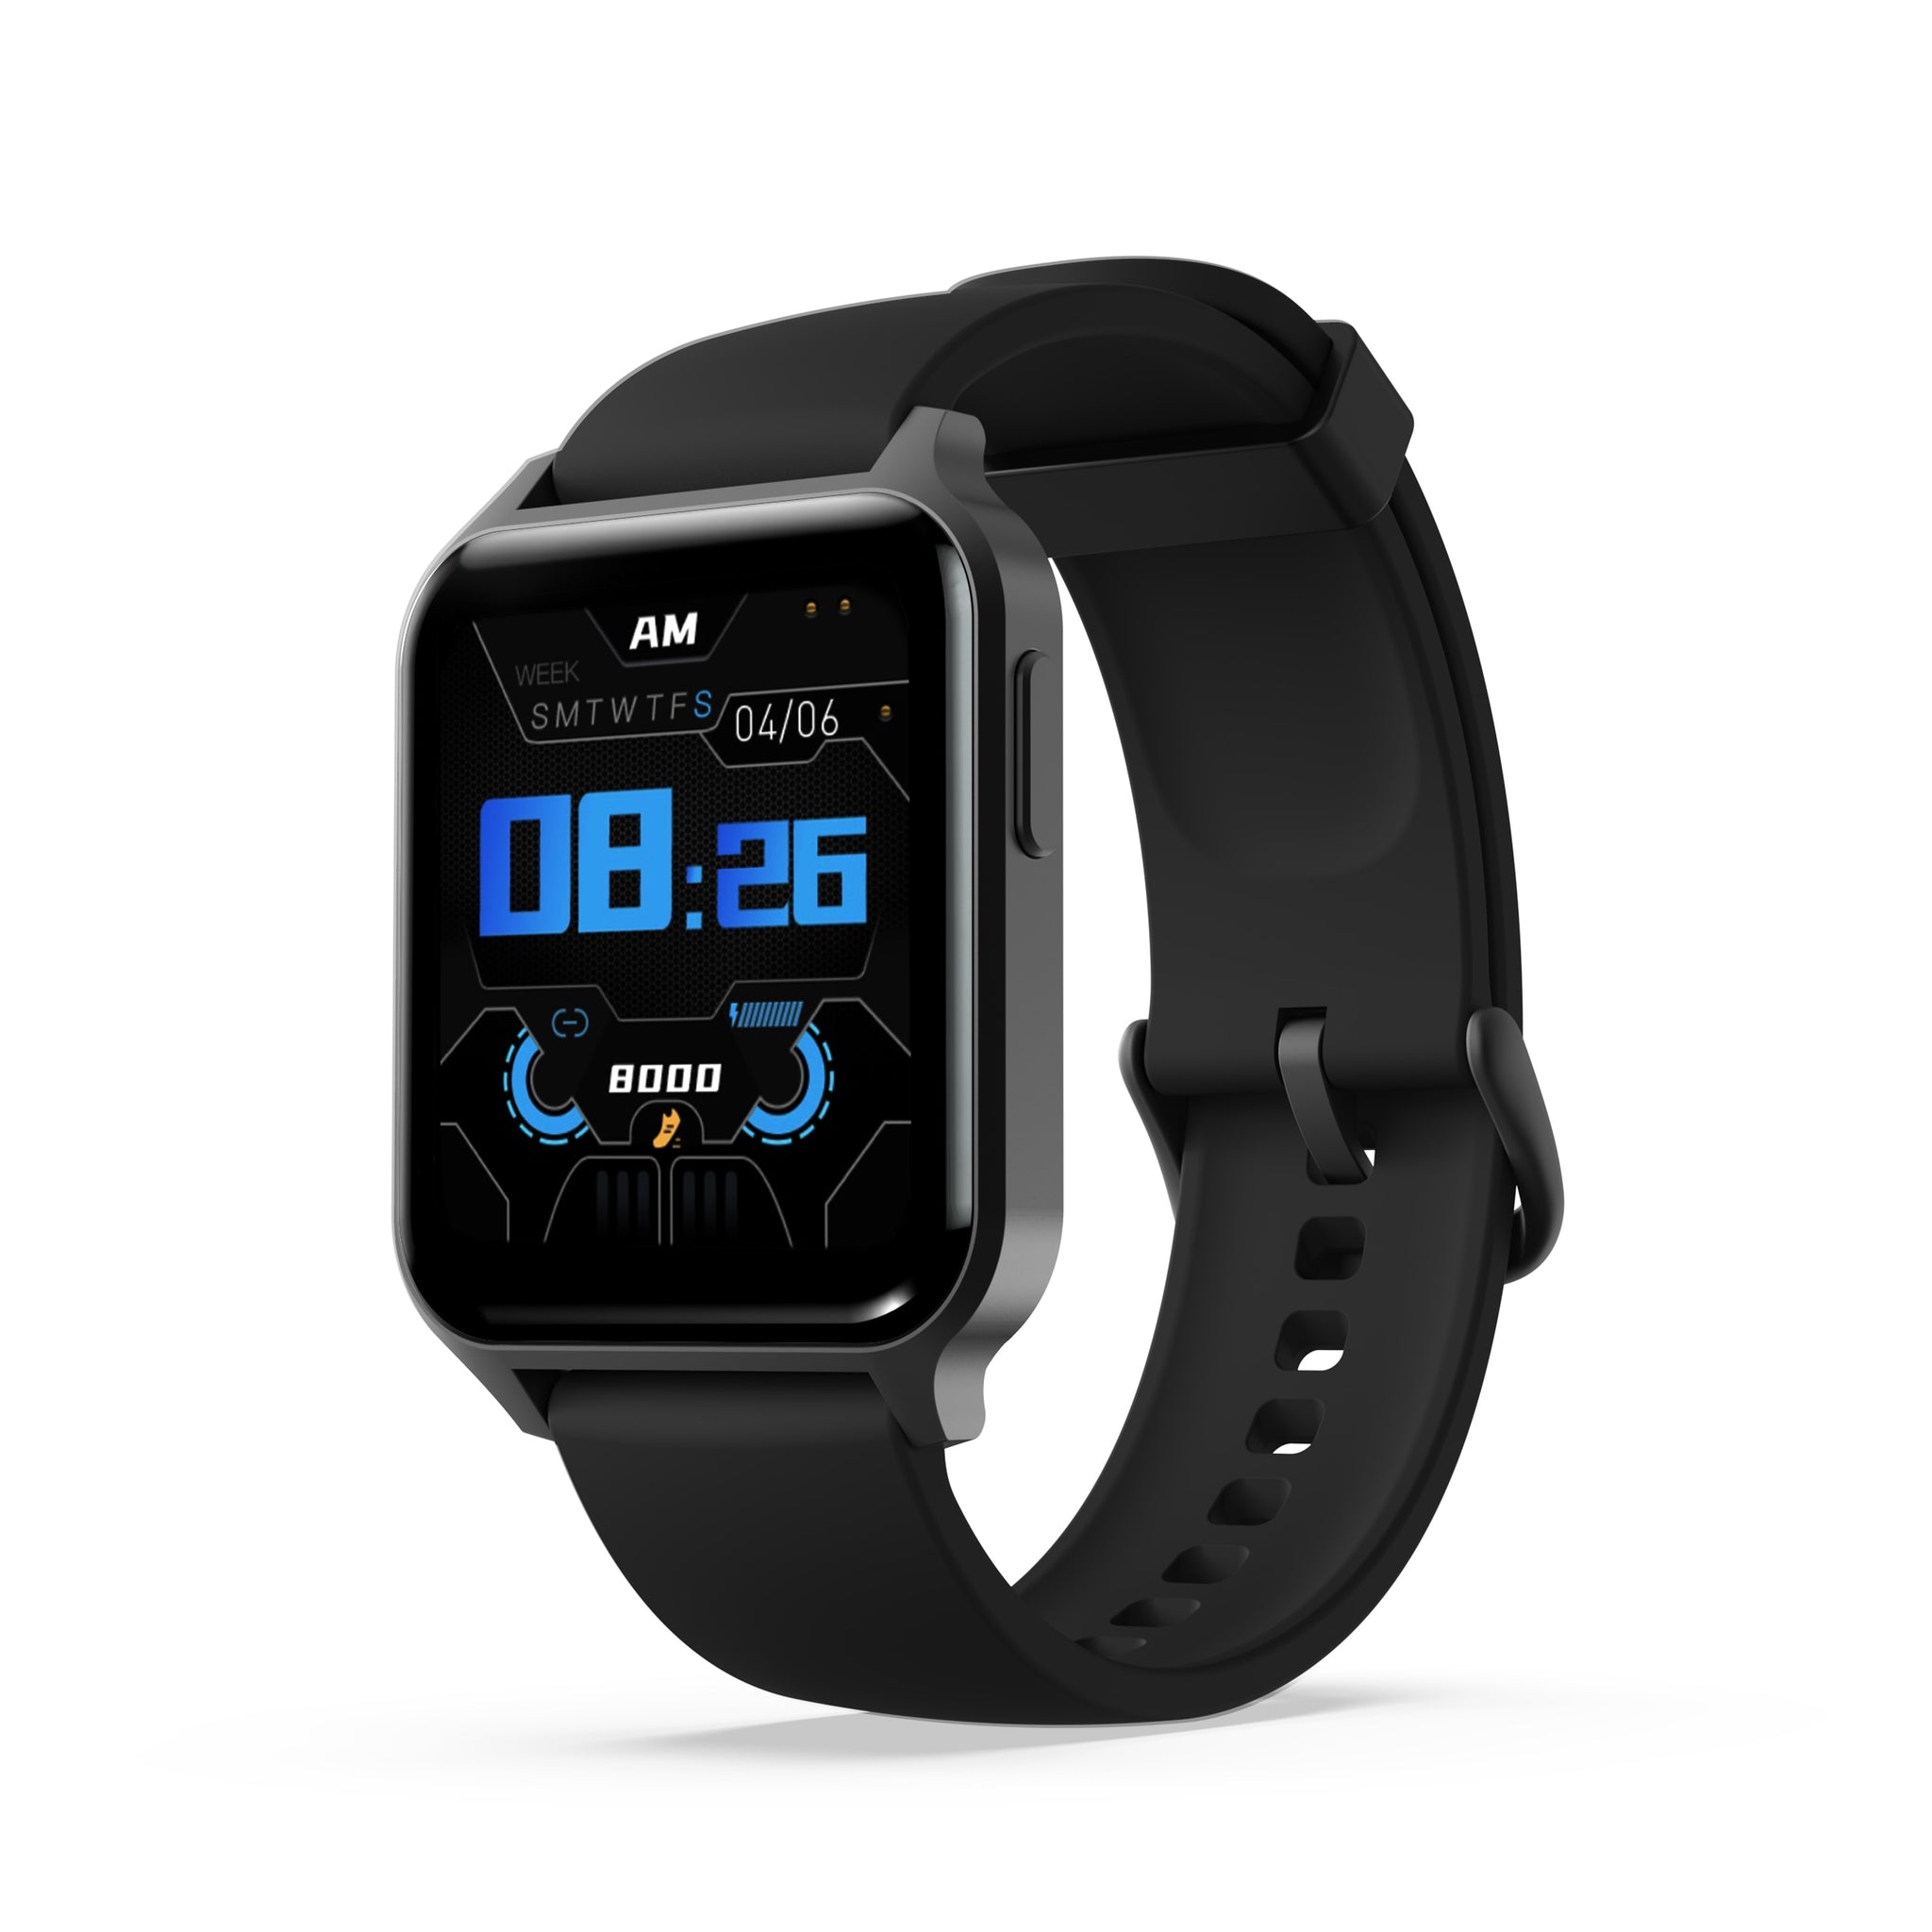 Smart Watch Bluetooth Fitness Tracker for iPhone Android in Black - Thefitnesshut.com